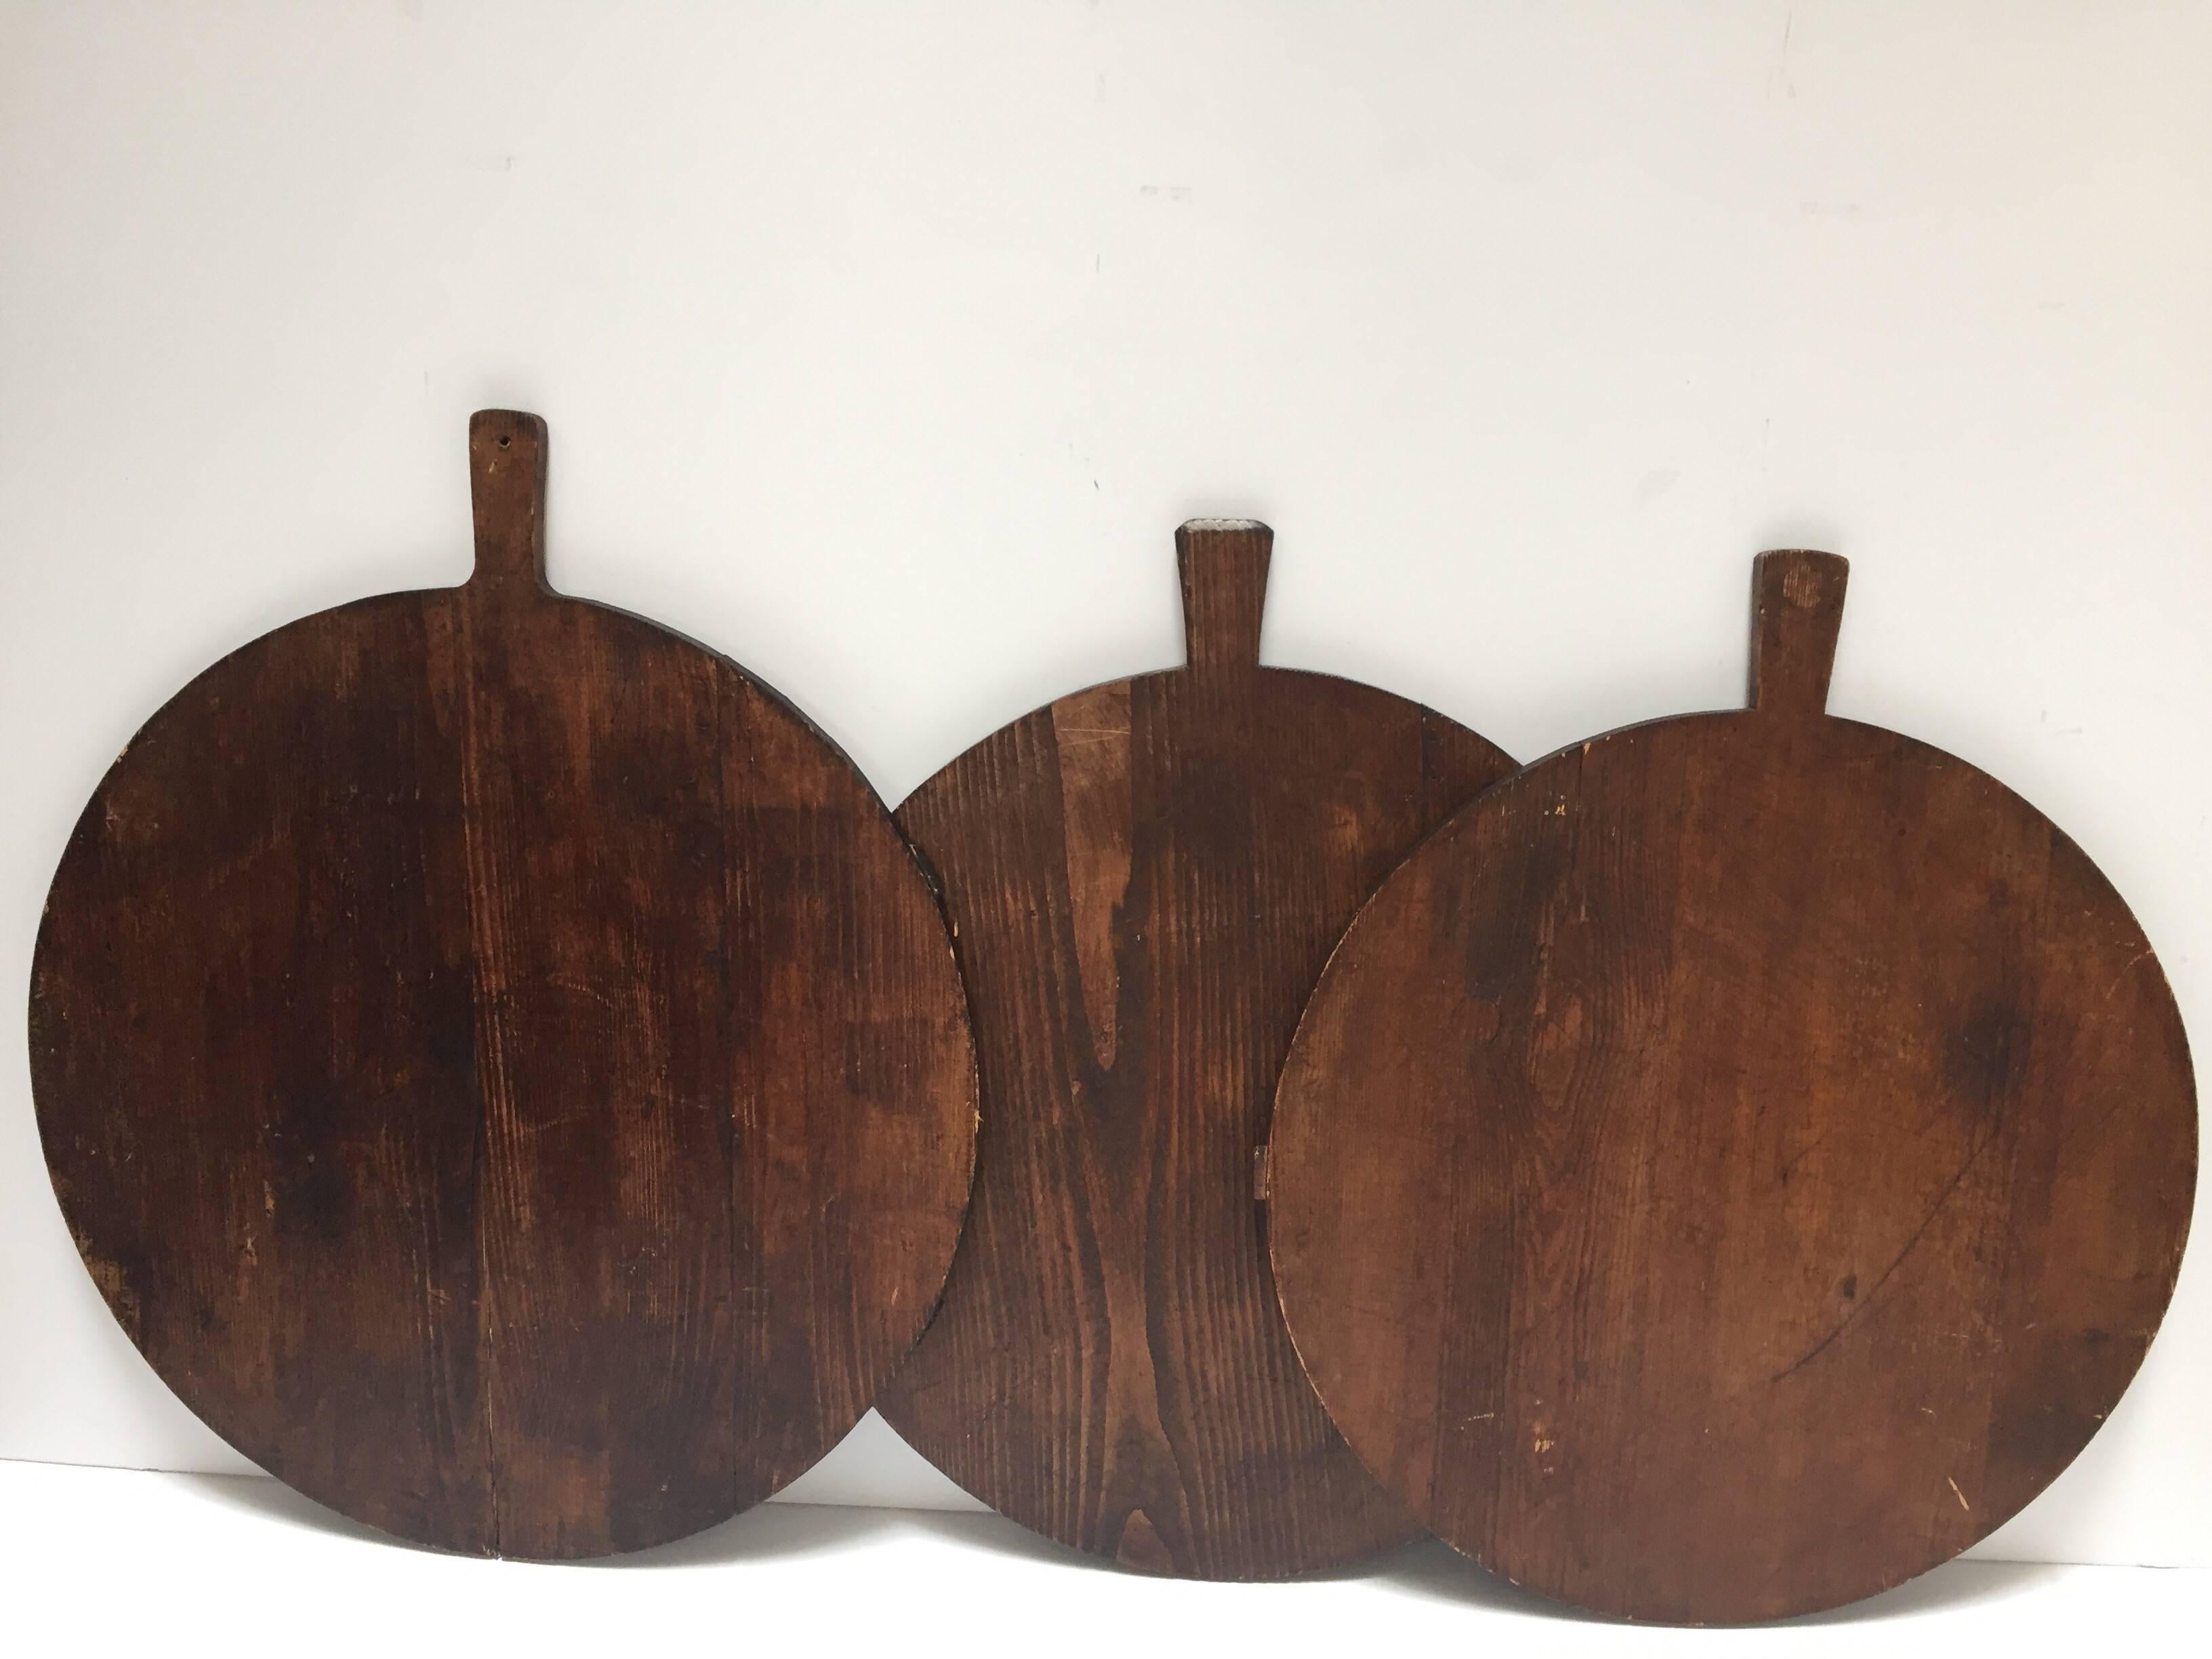 Set of three large primitive round reclaimed wood pine cutting boards or cheese board pr pizza board with handle.
Decorative farmhouse French rustic country bread wood cutting board with handle and struts to the reverse measuring well over two feet